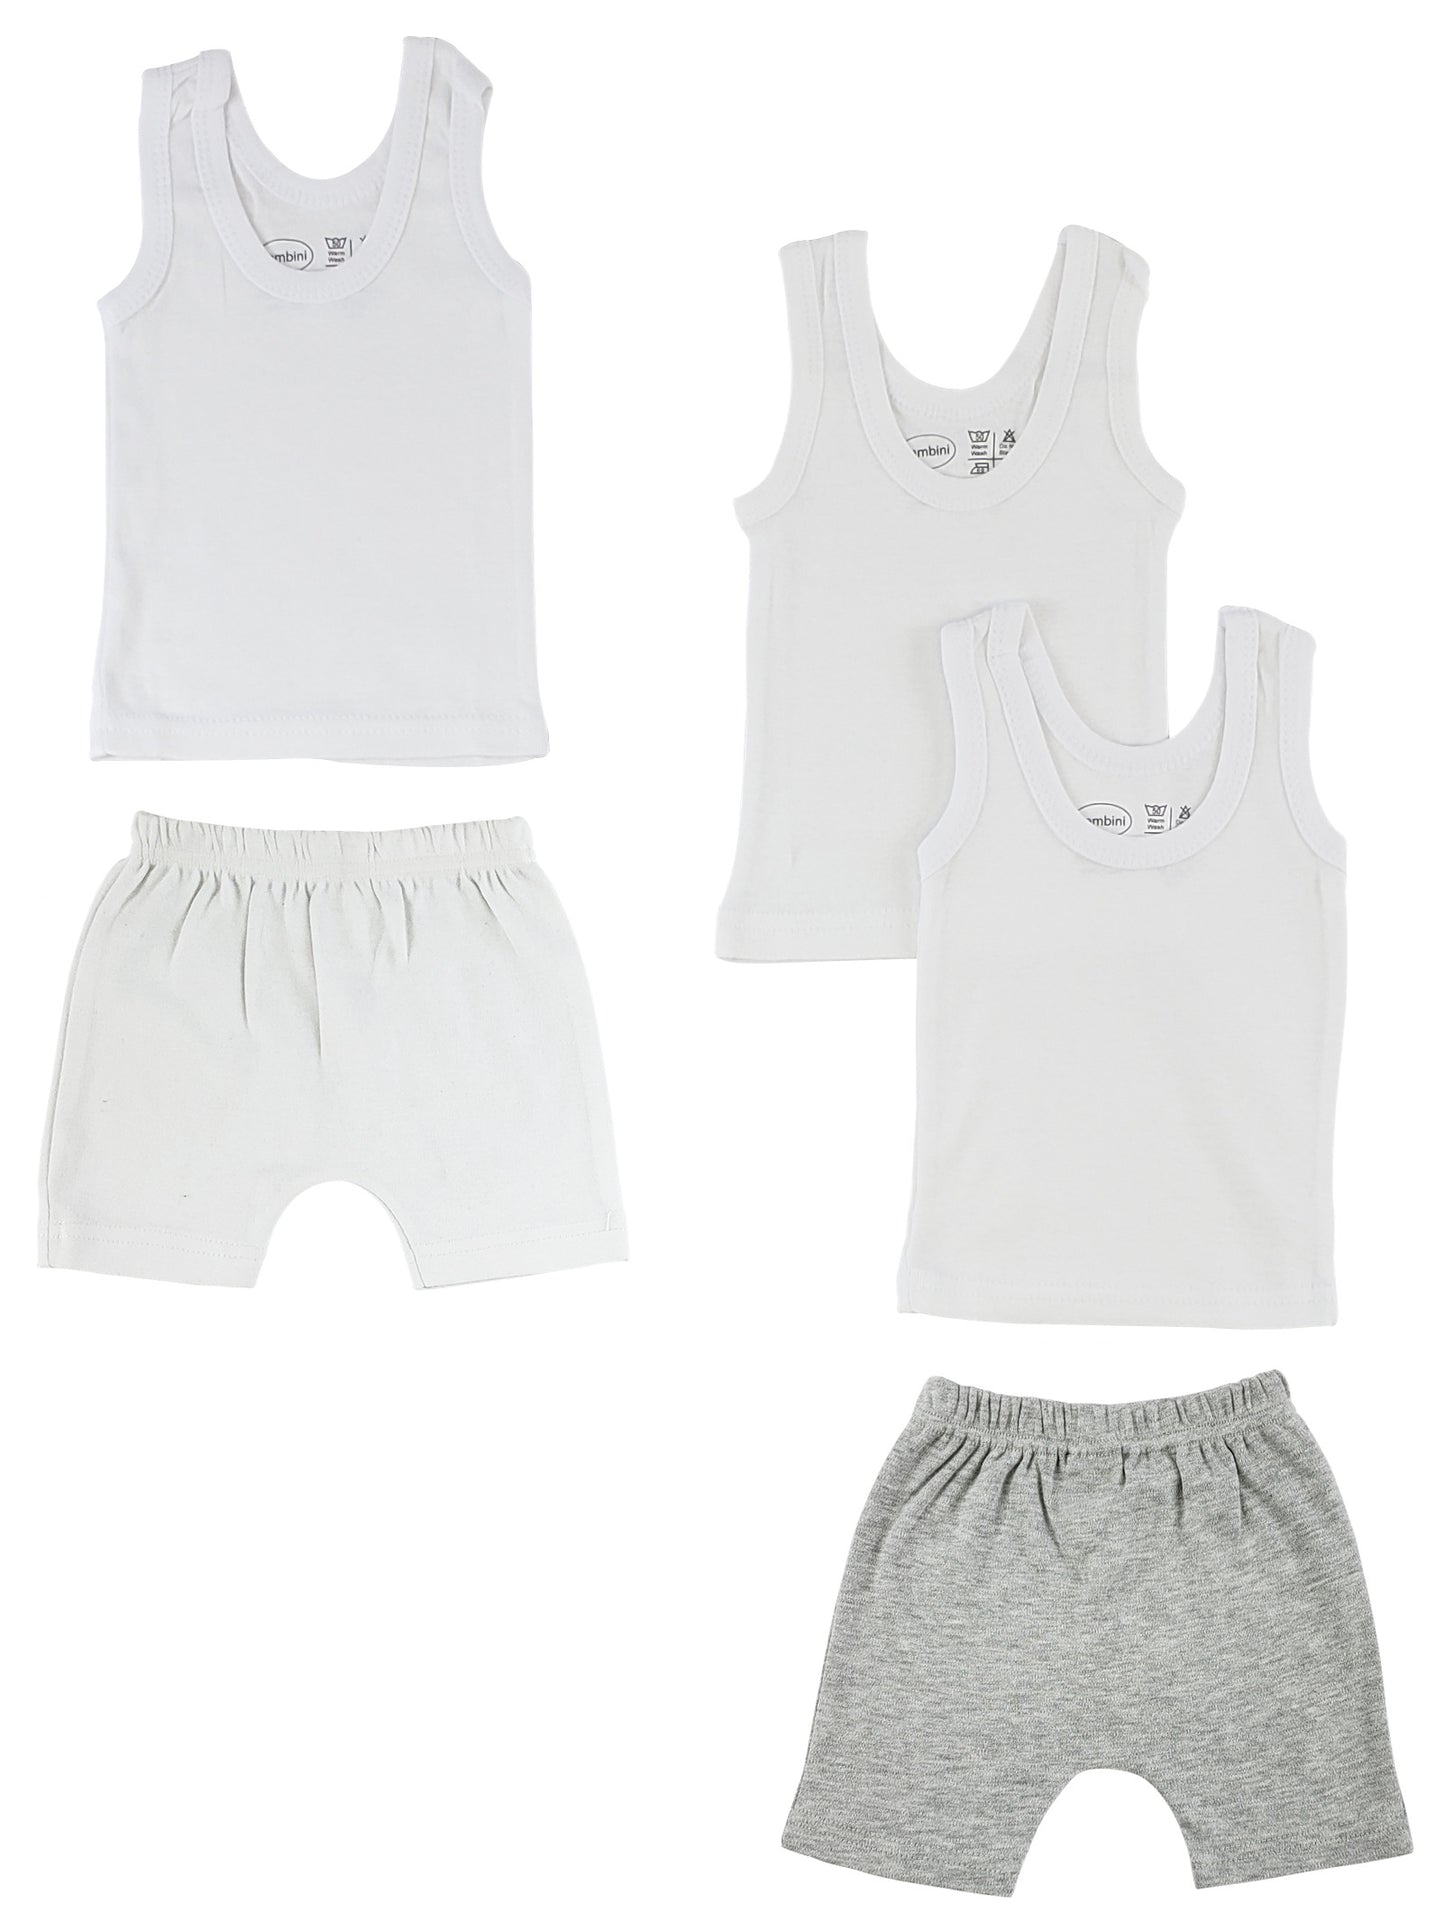 Infant Tank Tops and Pants